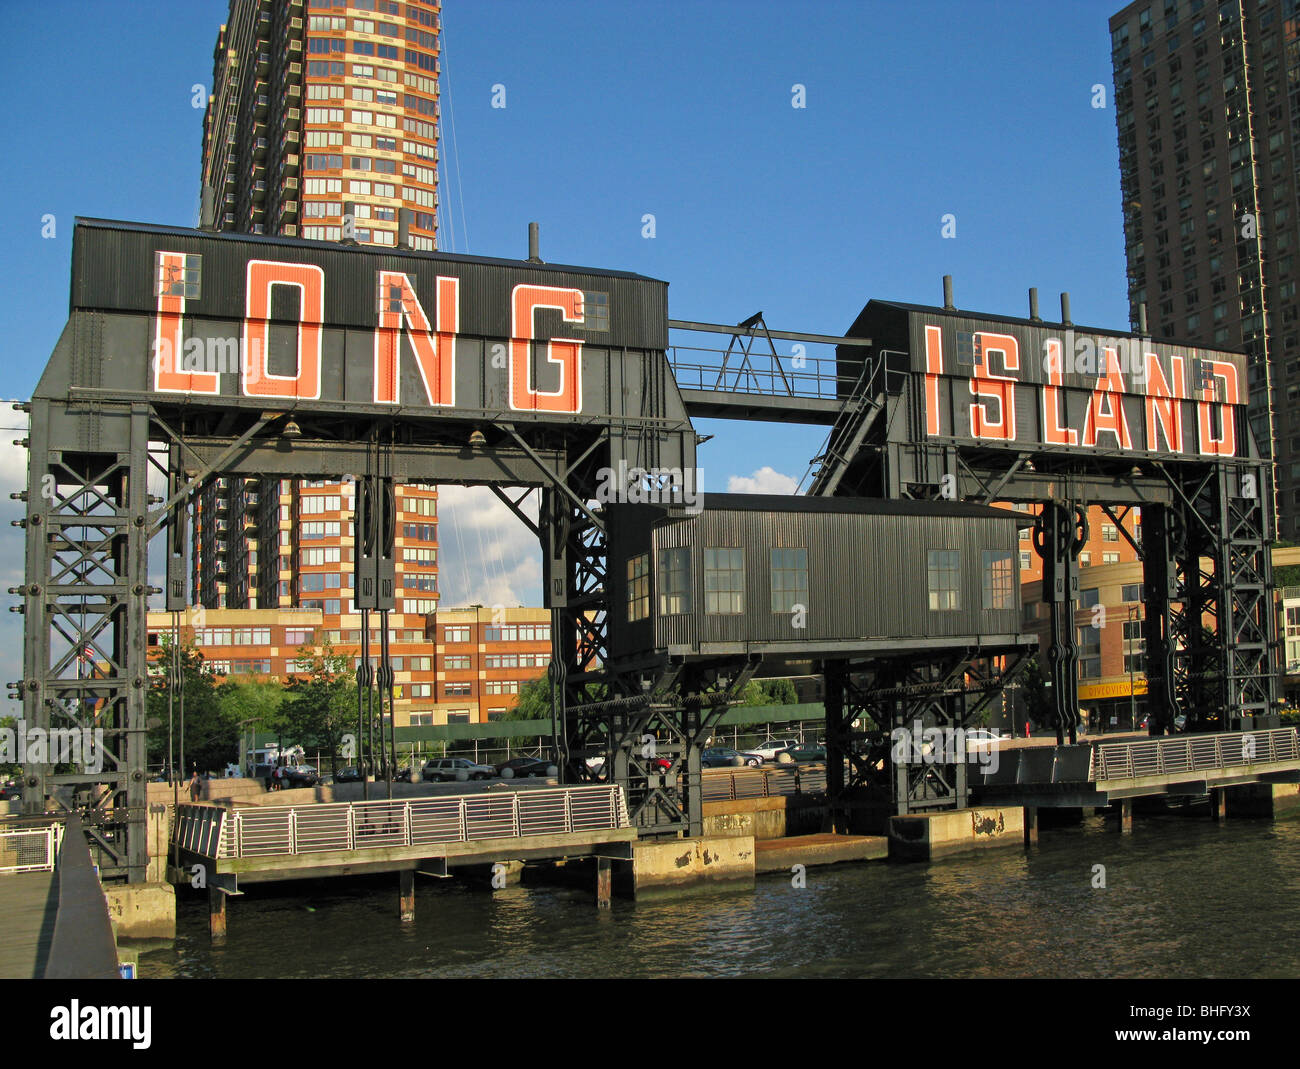 Long Island sign queens Queens New York Long Island City waterfront old rail car landing  new buildings Stock Photo